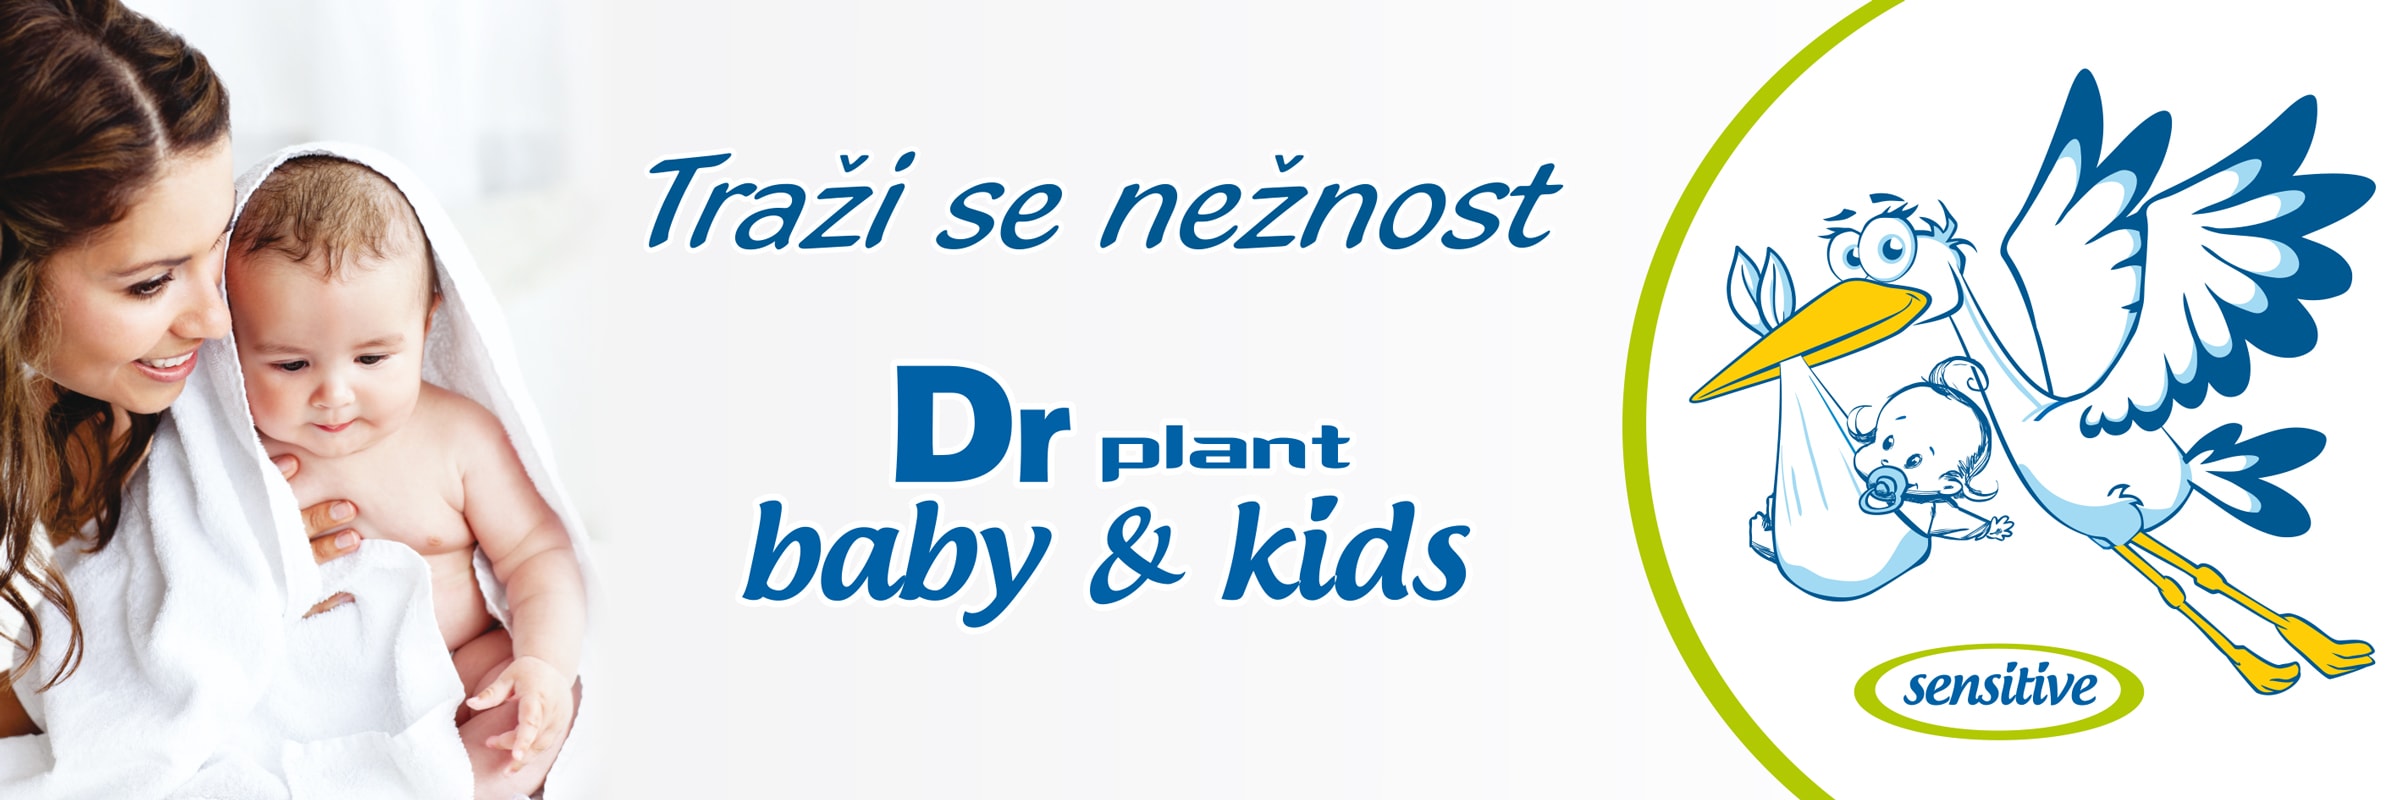 Dr Plant baby & kids